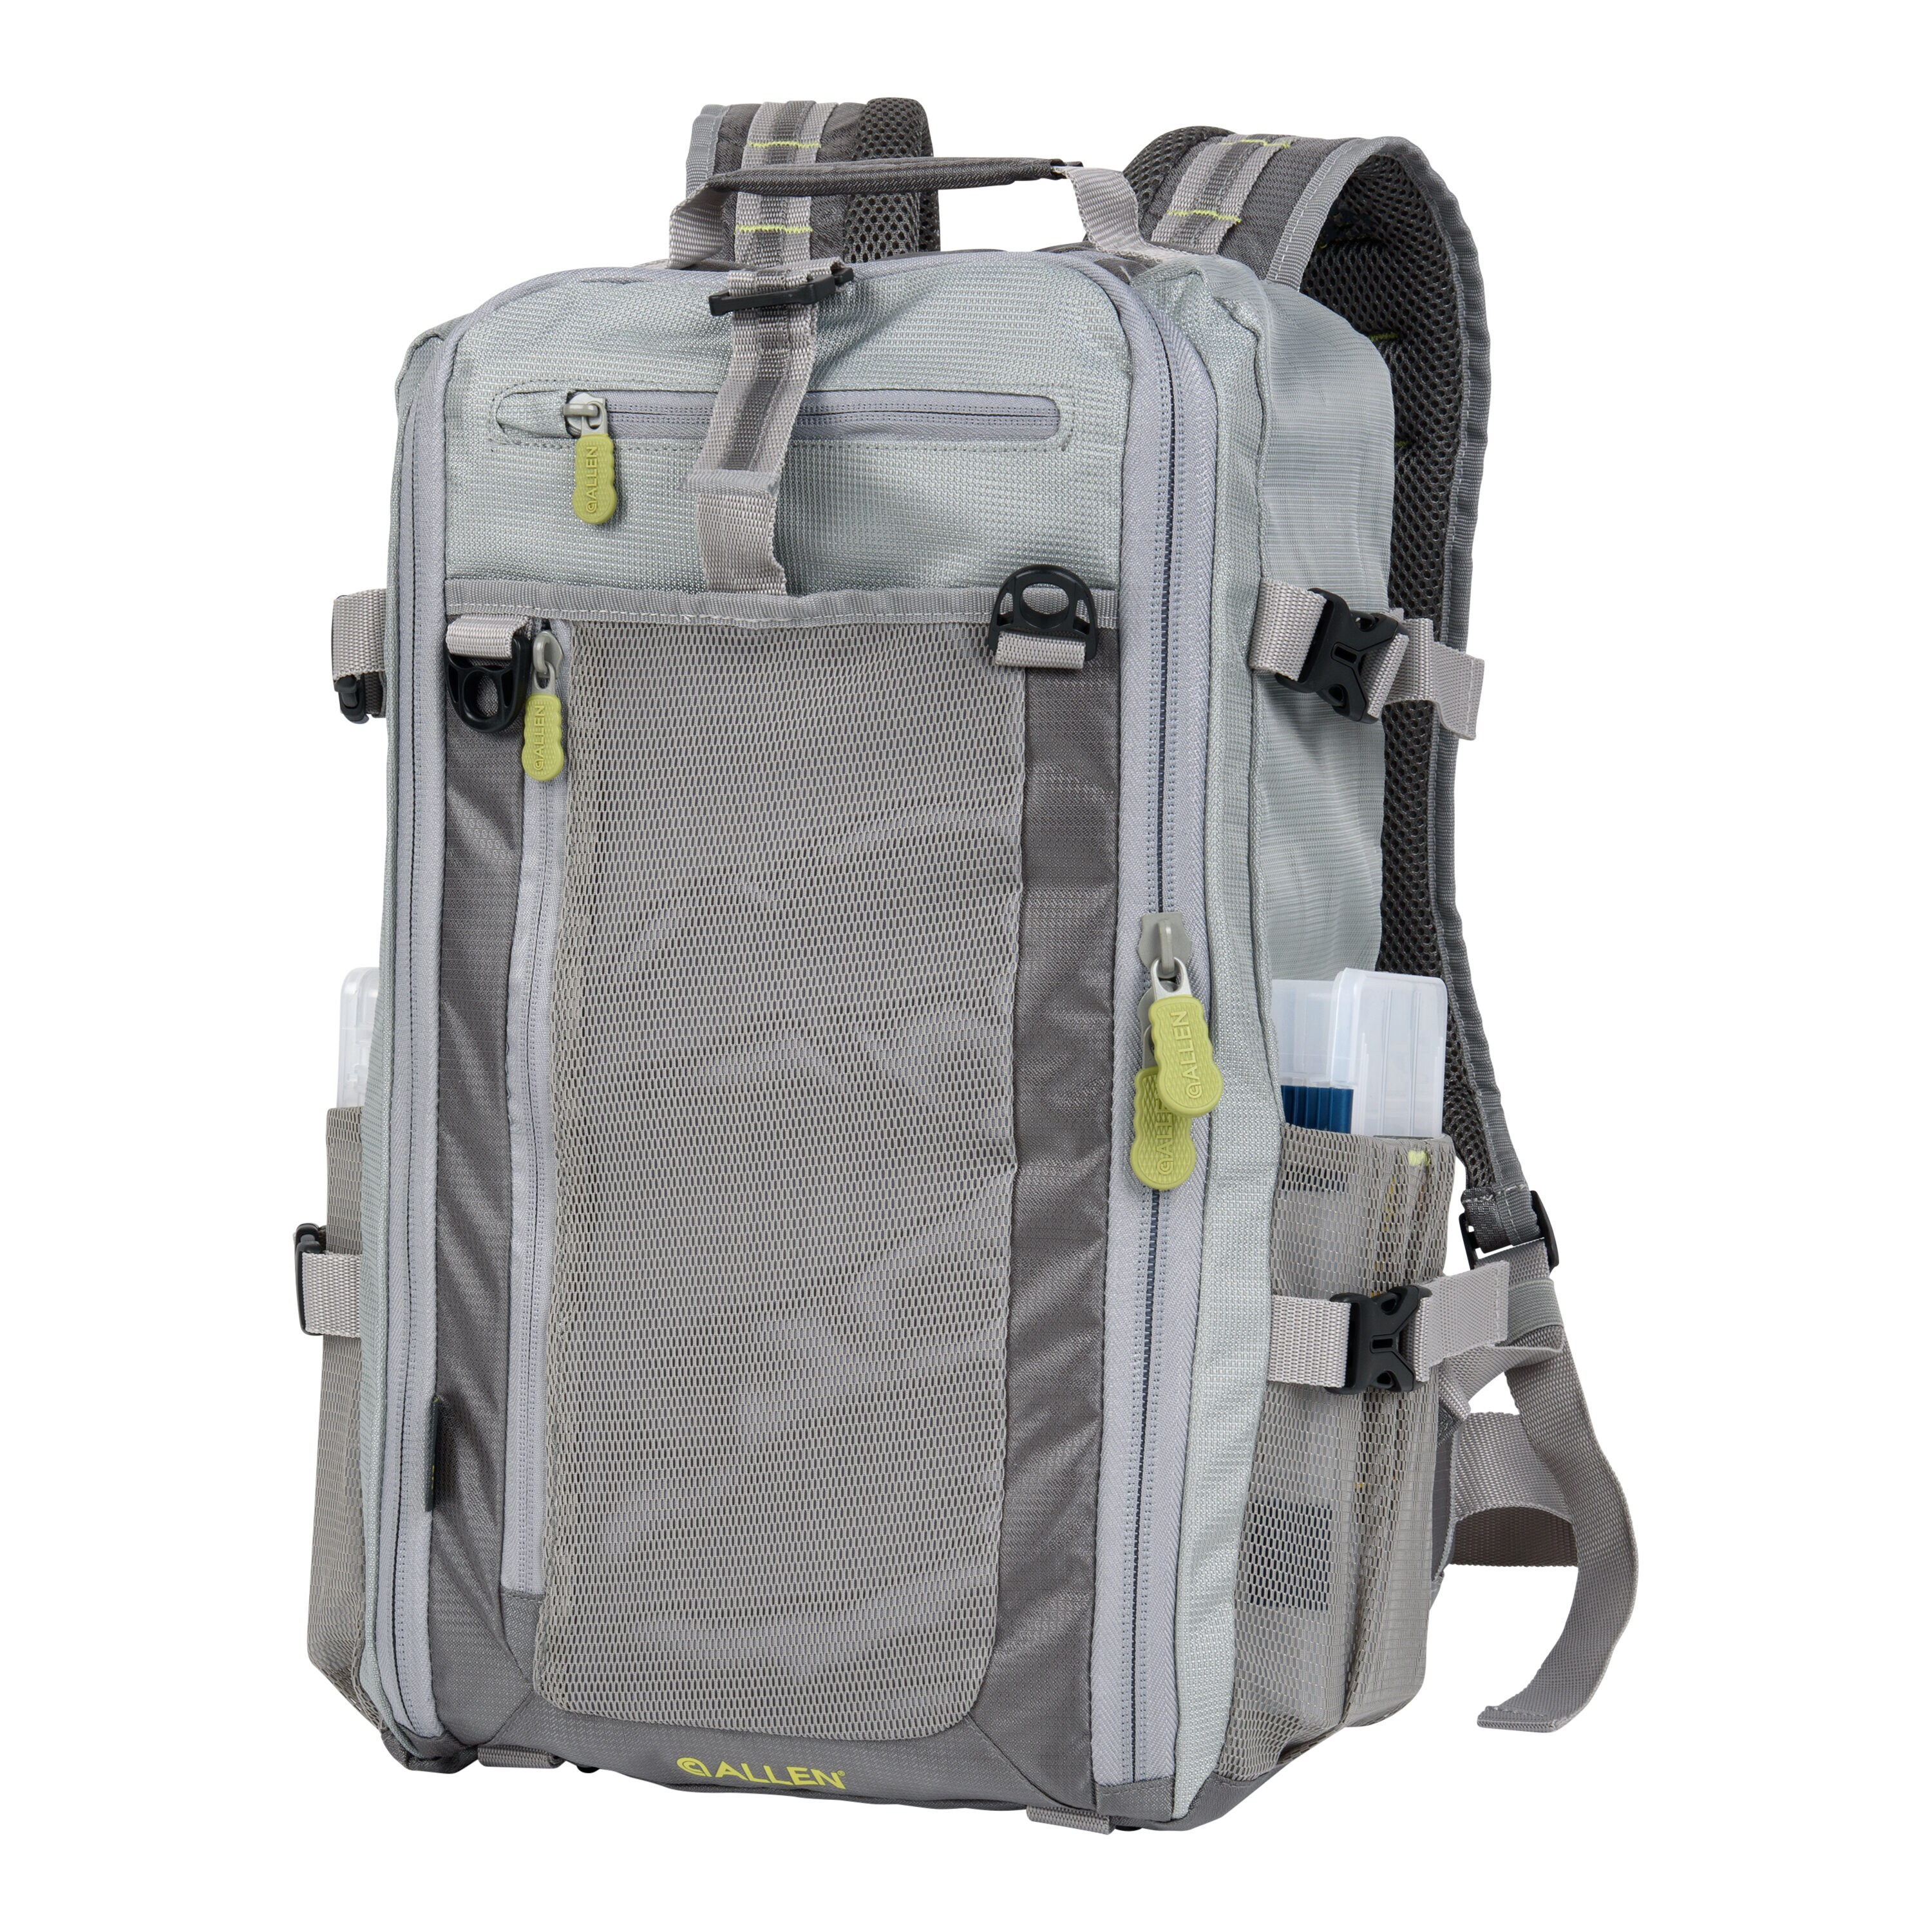 Allen Company Bear Creek Micro Fly Fishing Chest Pack, Fits Up to 2 Tackle/Fly Boxes, Gray/Lime